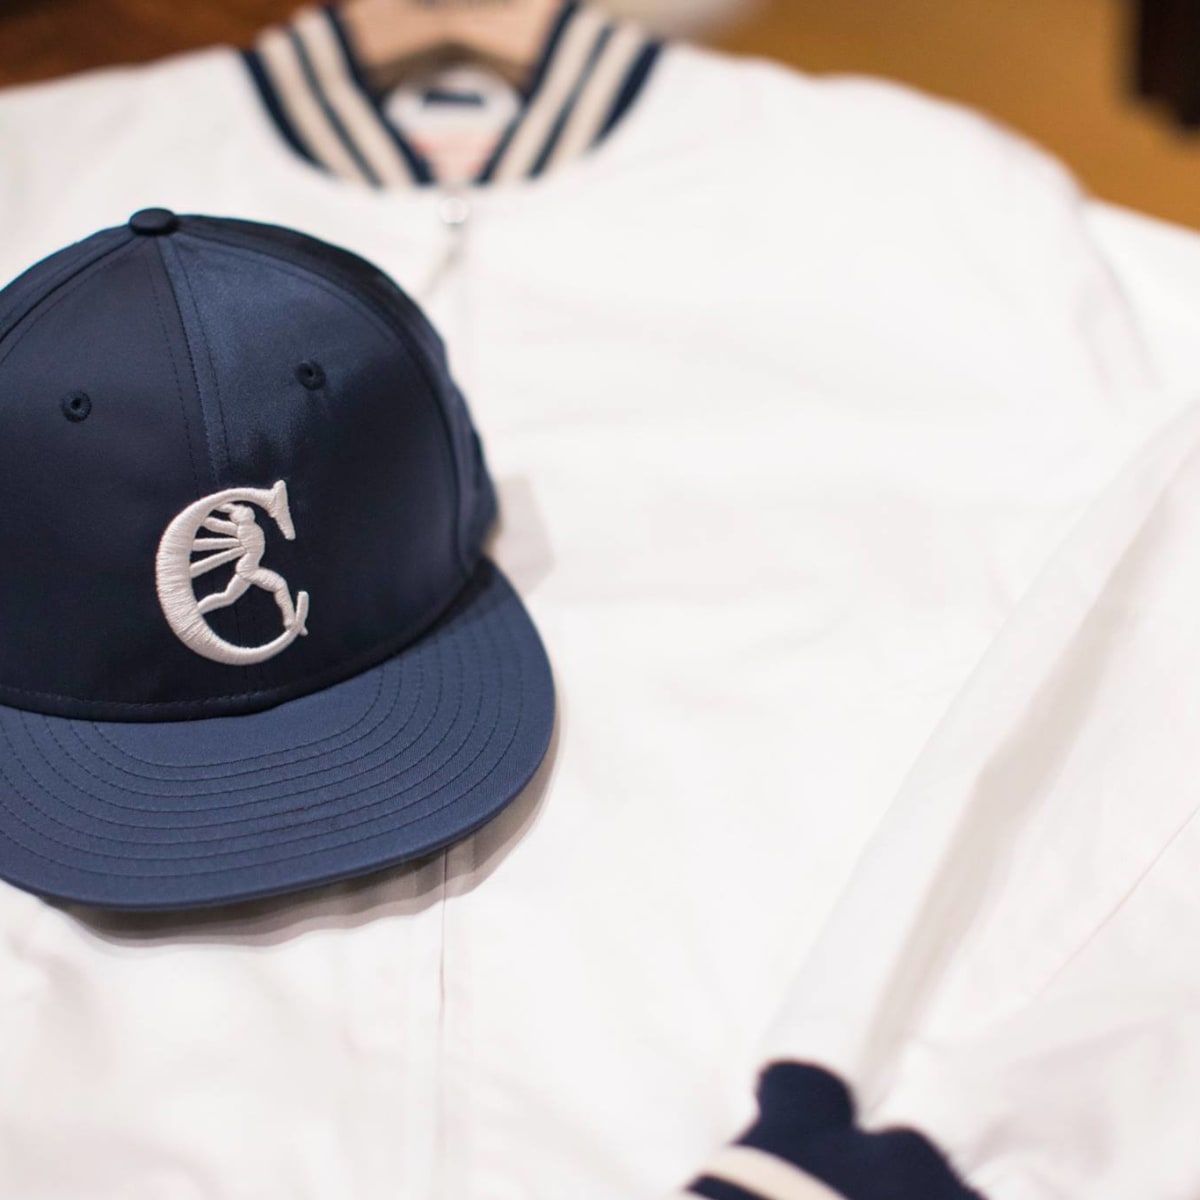 Todd Snyder x New Era Launch Sophisticated MLB Hat Collection - Airows